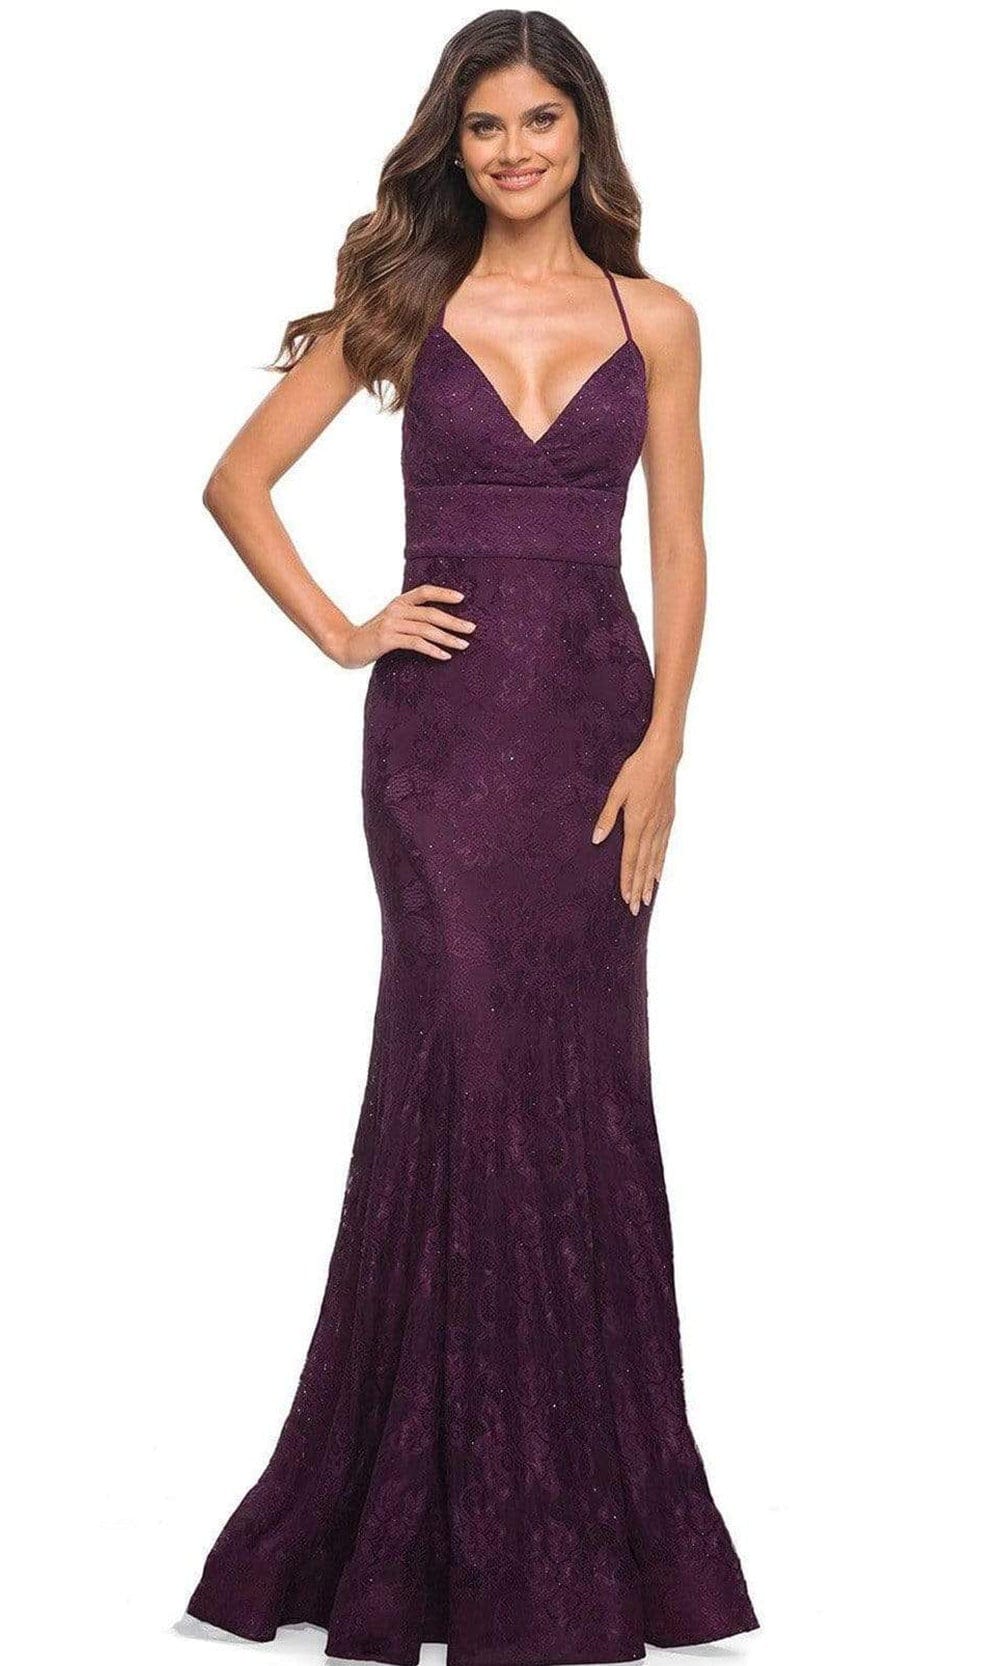 Image of La Femme - 30442 Floral Lace Strappy Sheath Gown